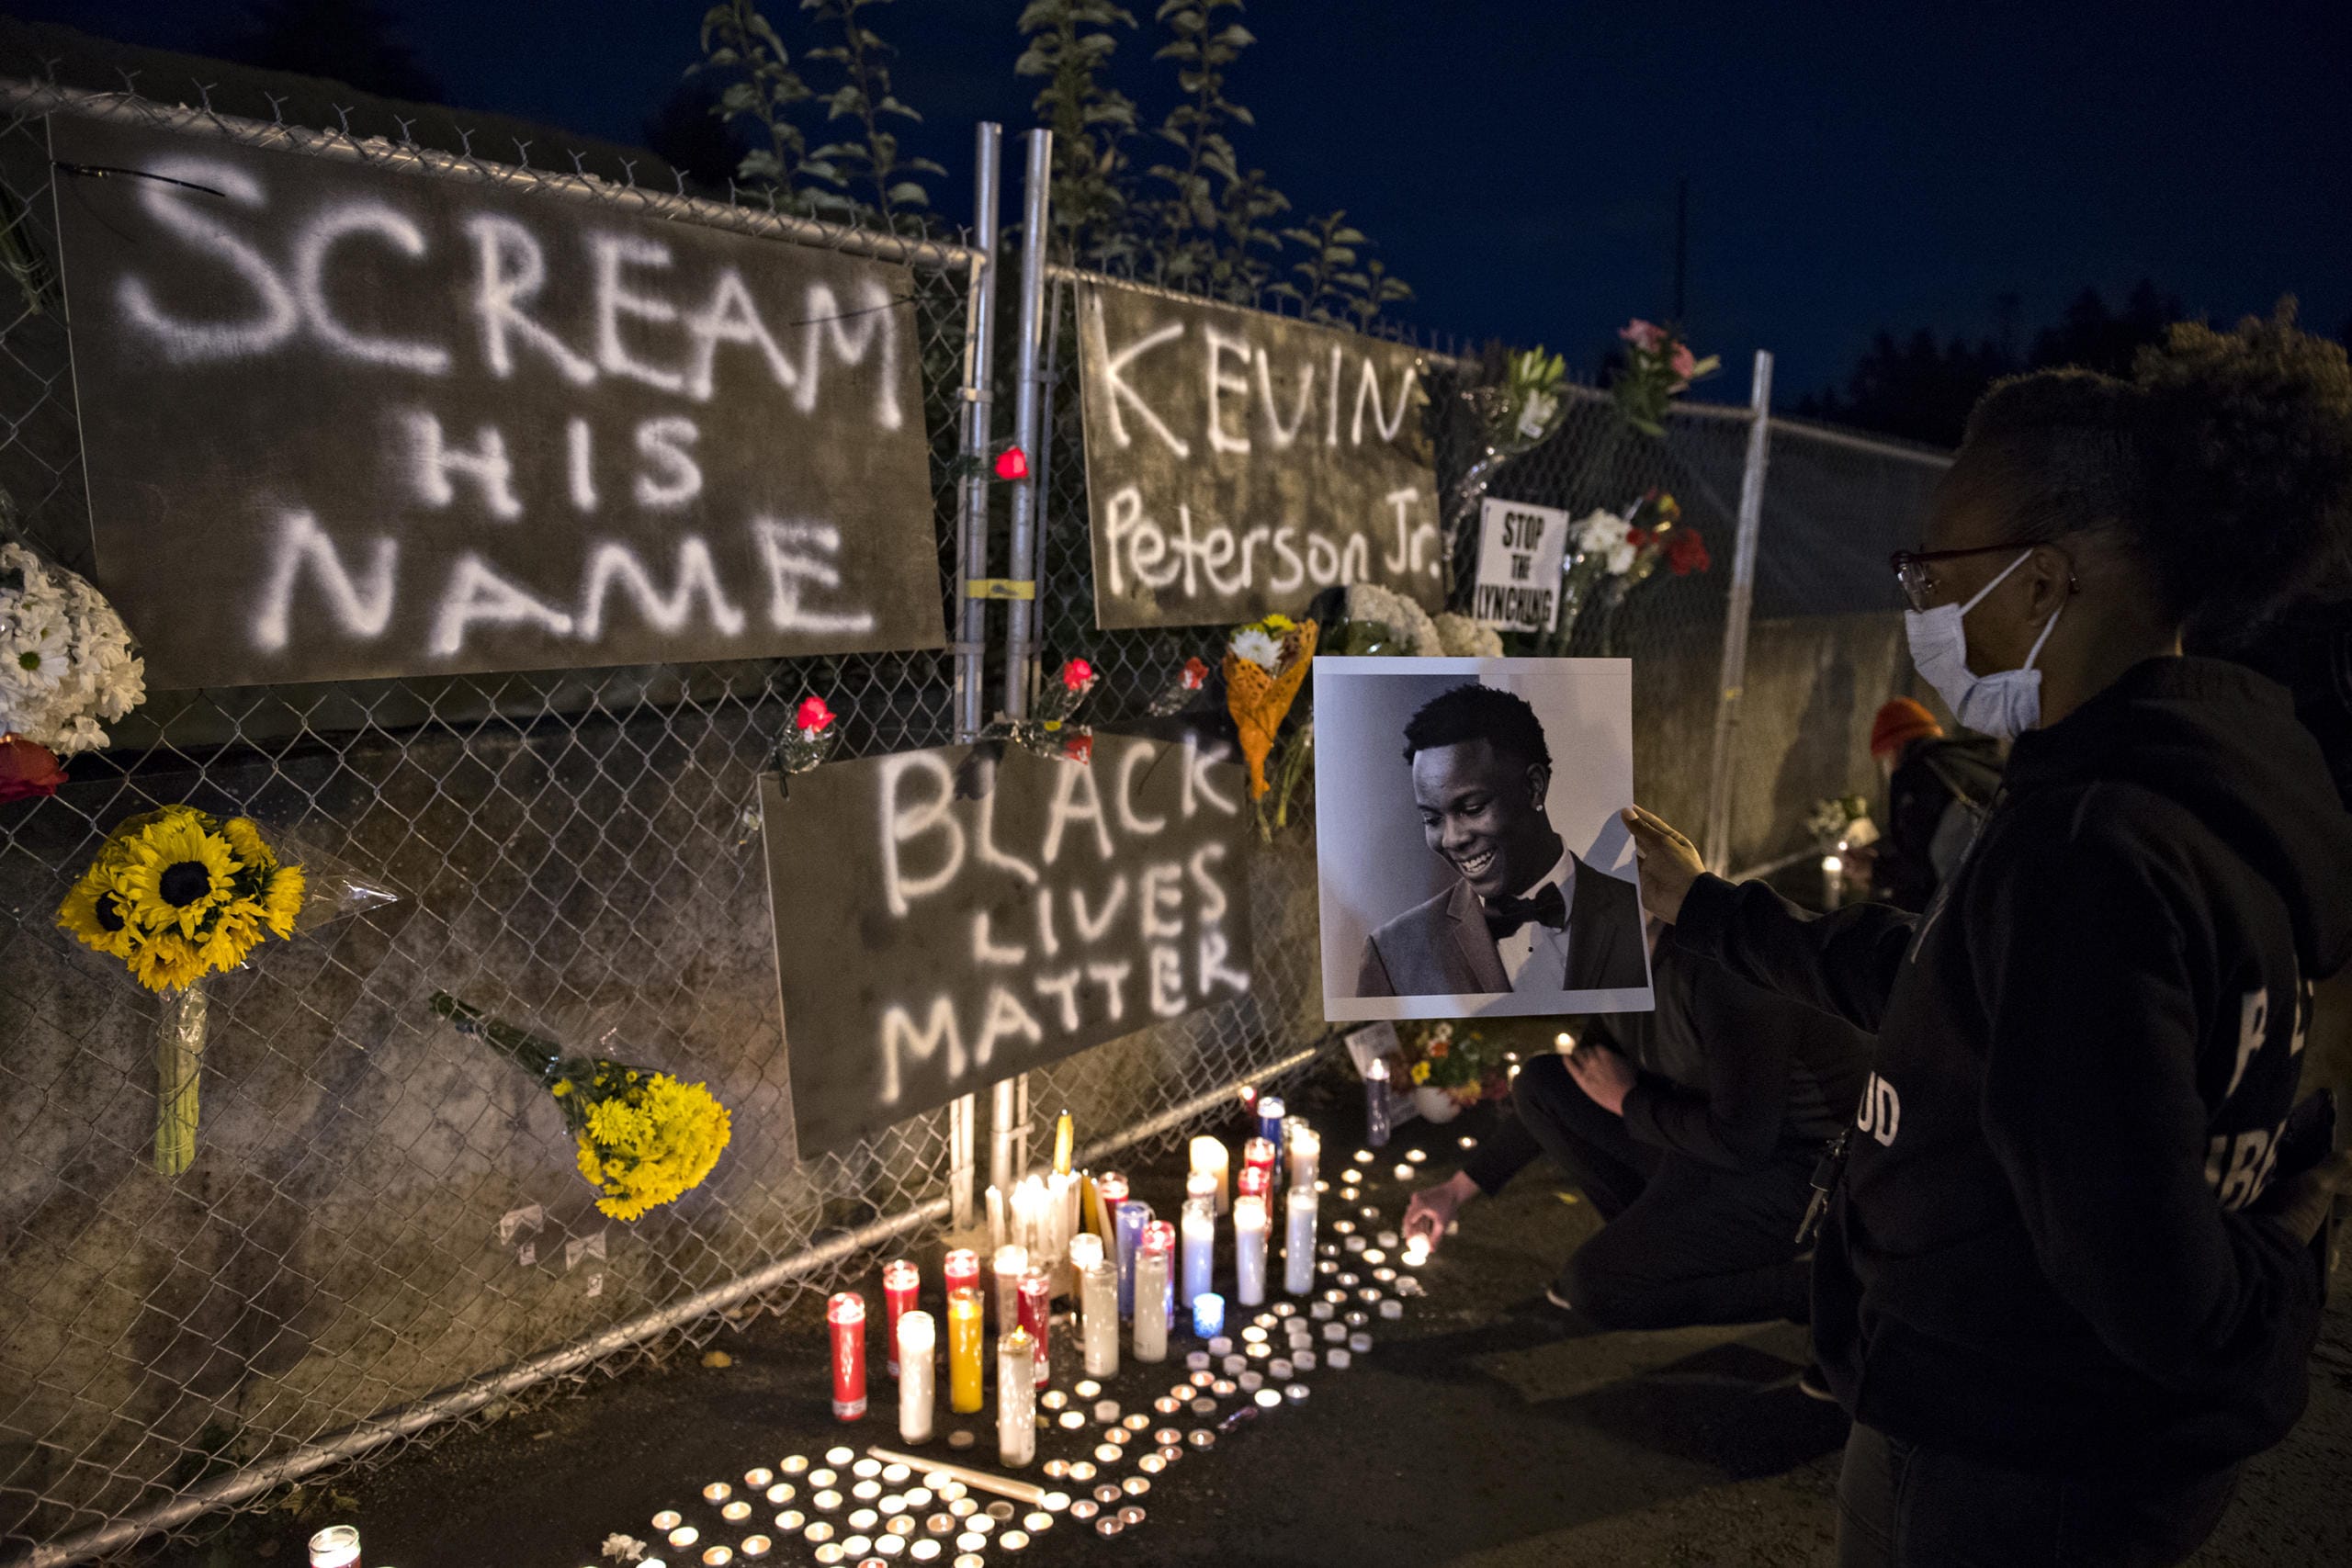 Alisha, one of the event organizers who declined to give her last name, holds a photo of Kevin Peterson Jr., a 21-year-old Black Camas man who was killed Thursday, as he is remembered with a candlelight vigil at the Hazel Dell branch of U.S. Bank on Friday night, Oct. 30, 2020.